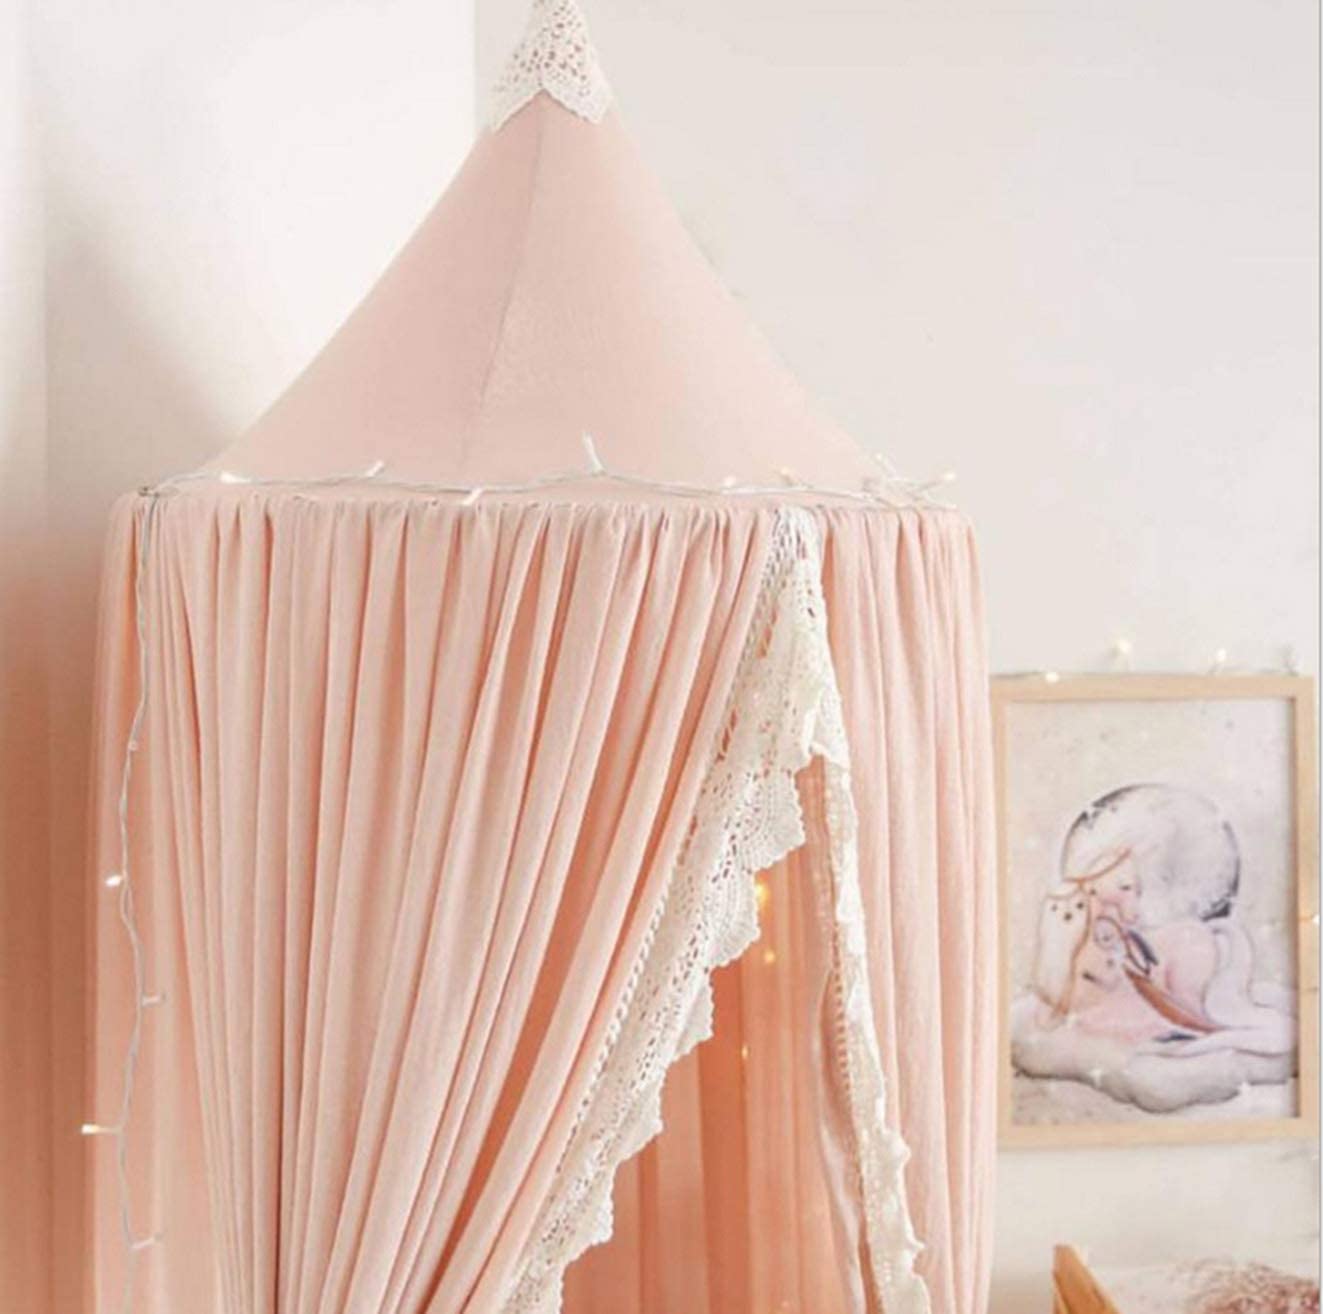 Dome Princess Bed Canopy Curtain Cotton Tent Children's Room Decor